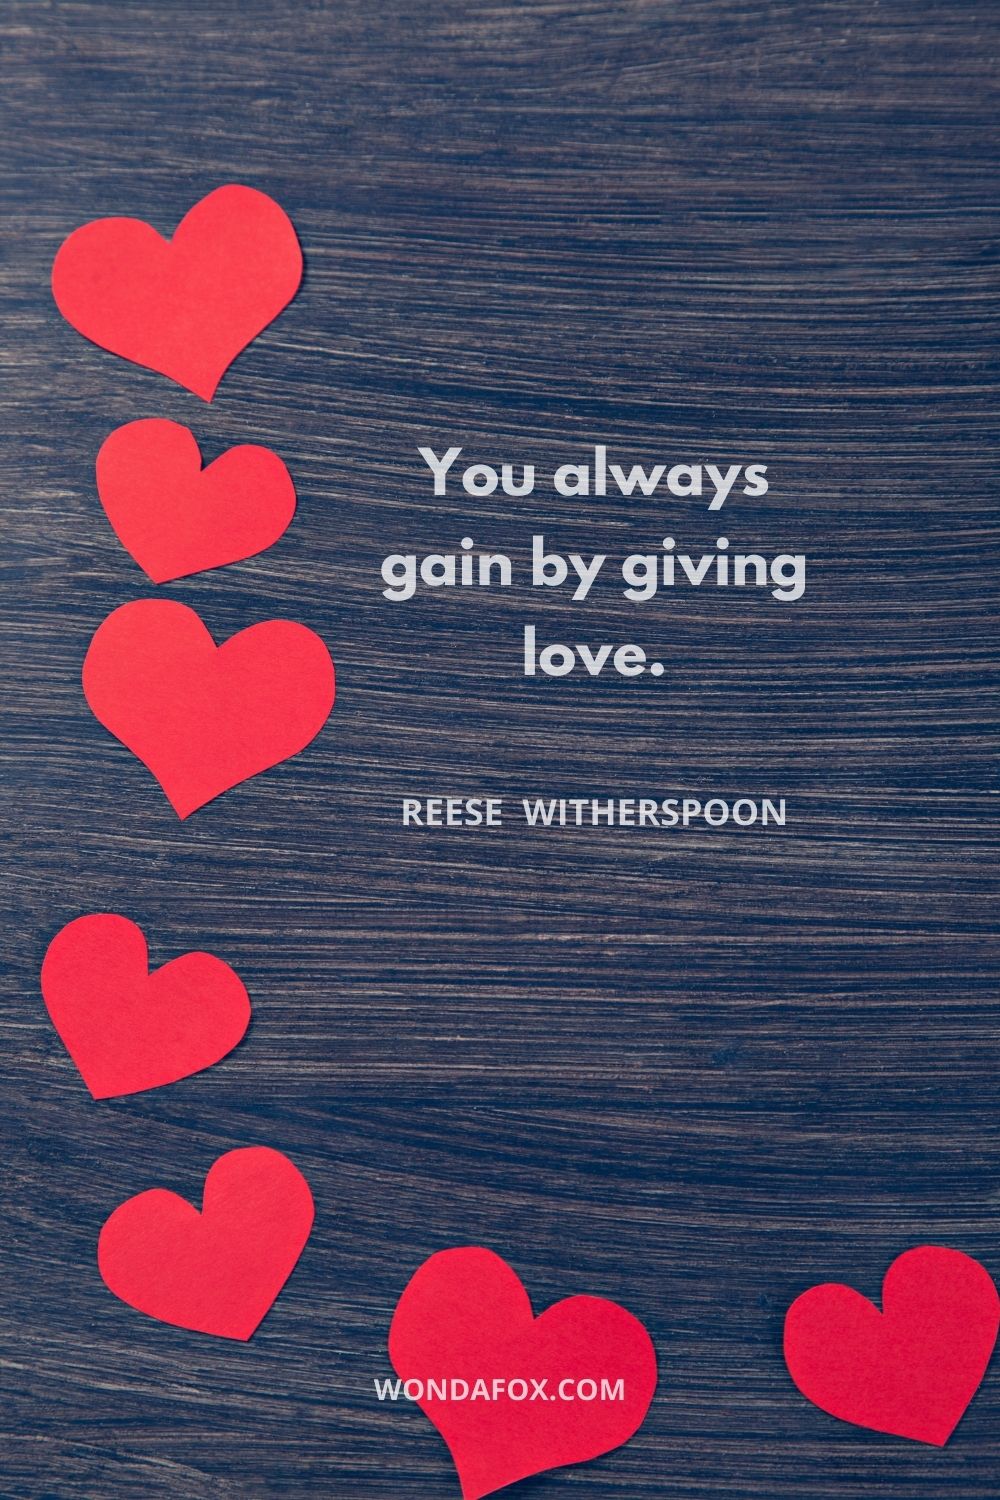 You always gain by giving love.